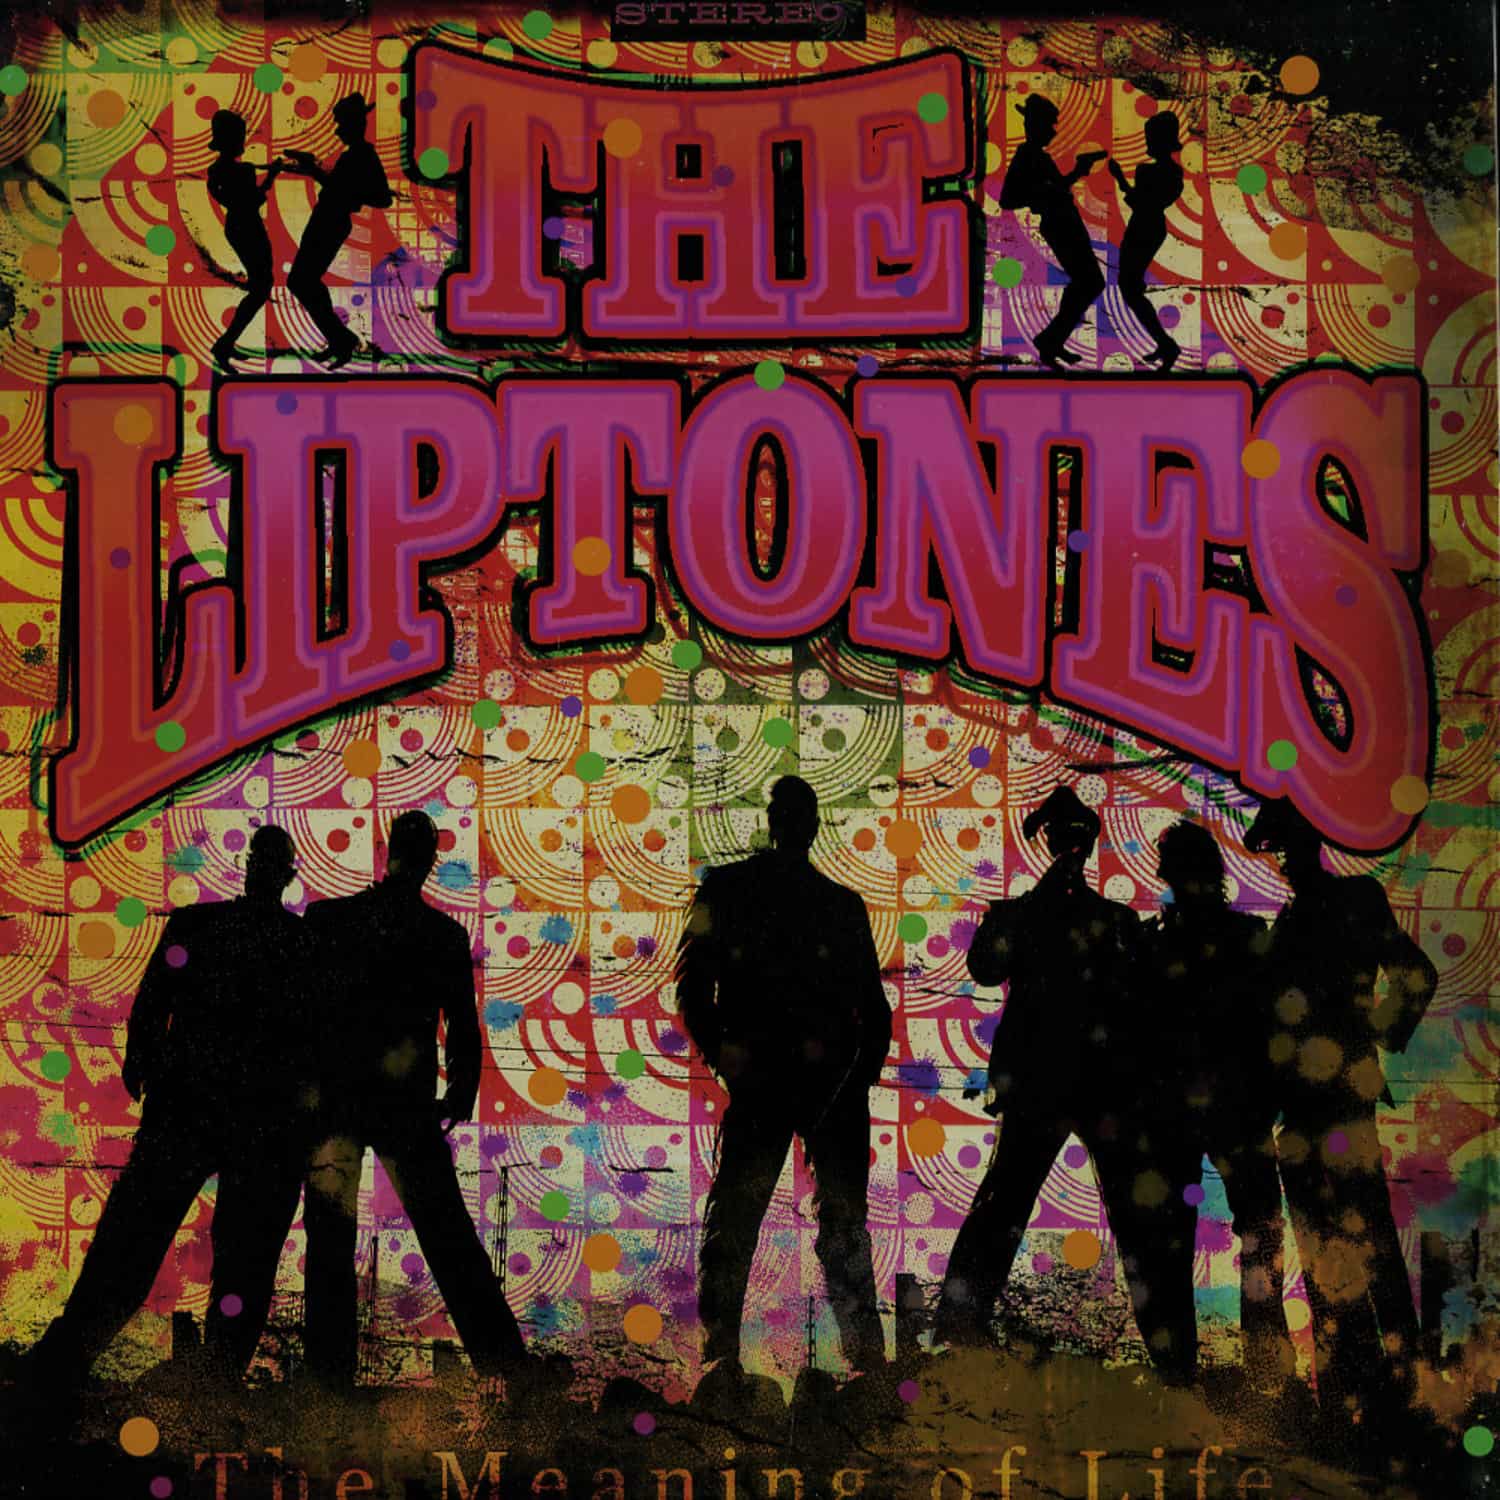 The Liptones - THE MEANING OF LIFE 